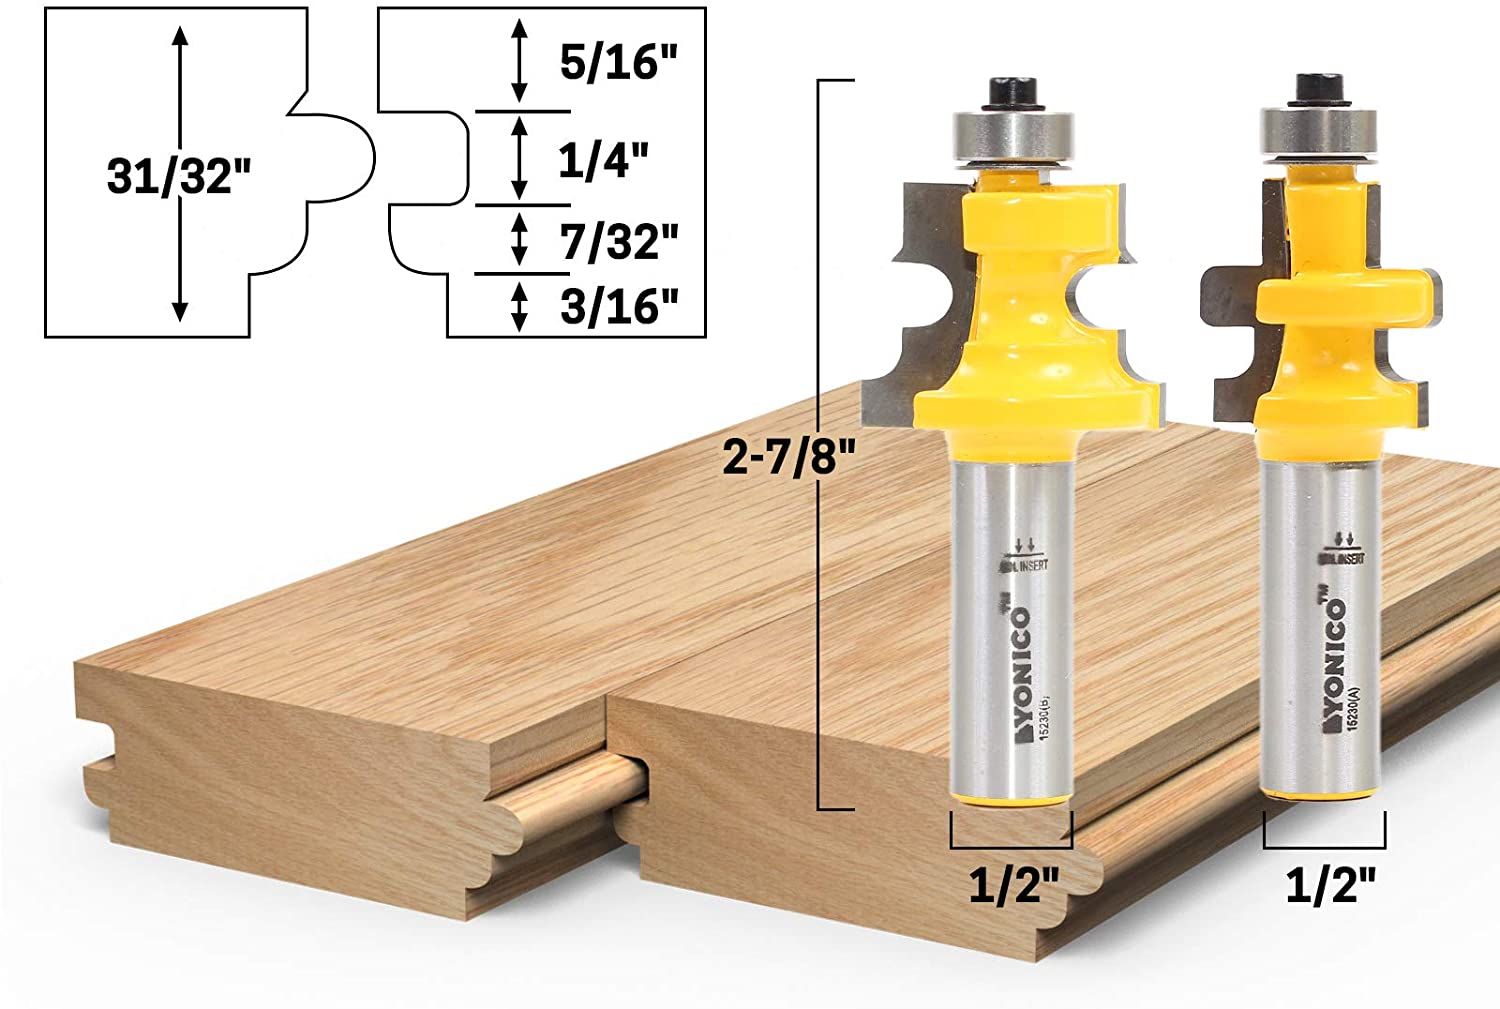 Yonico 15229 Flooring 2 Bit Tongue and Groove Router Bit Set